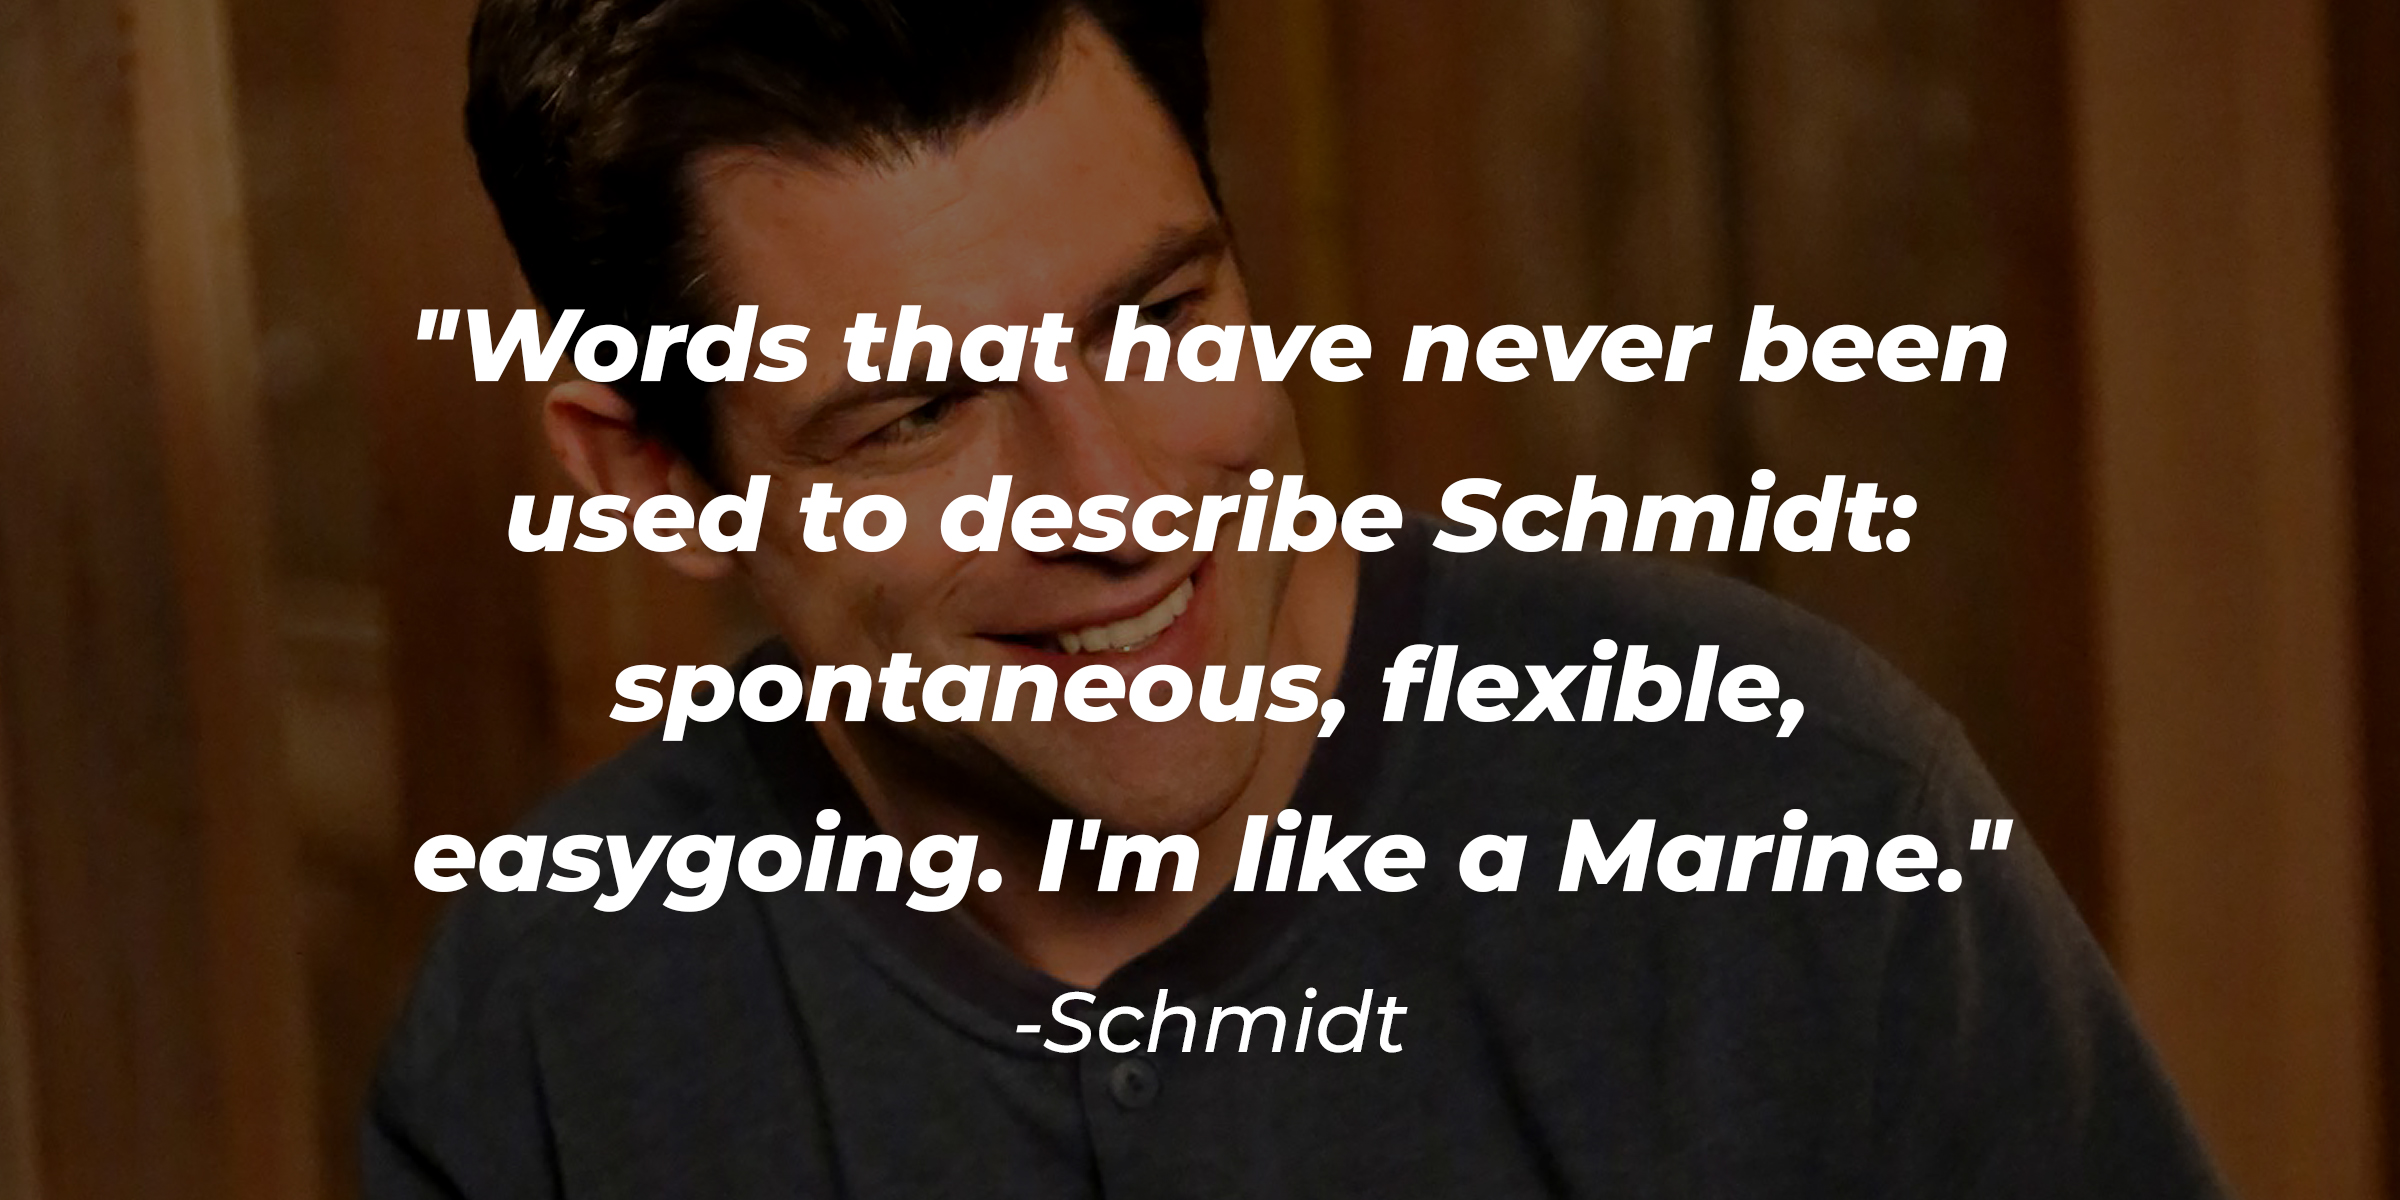 Schmidt's quote, "Words that have never been used to describe Schmidt: spontaneous, flexible, easygoing. I'm like a Marine." | Source: Facebook/OfficialNewGirl